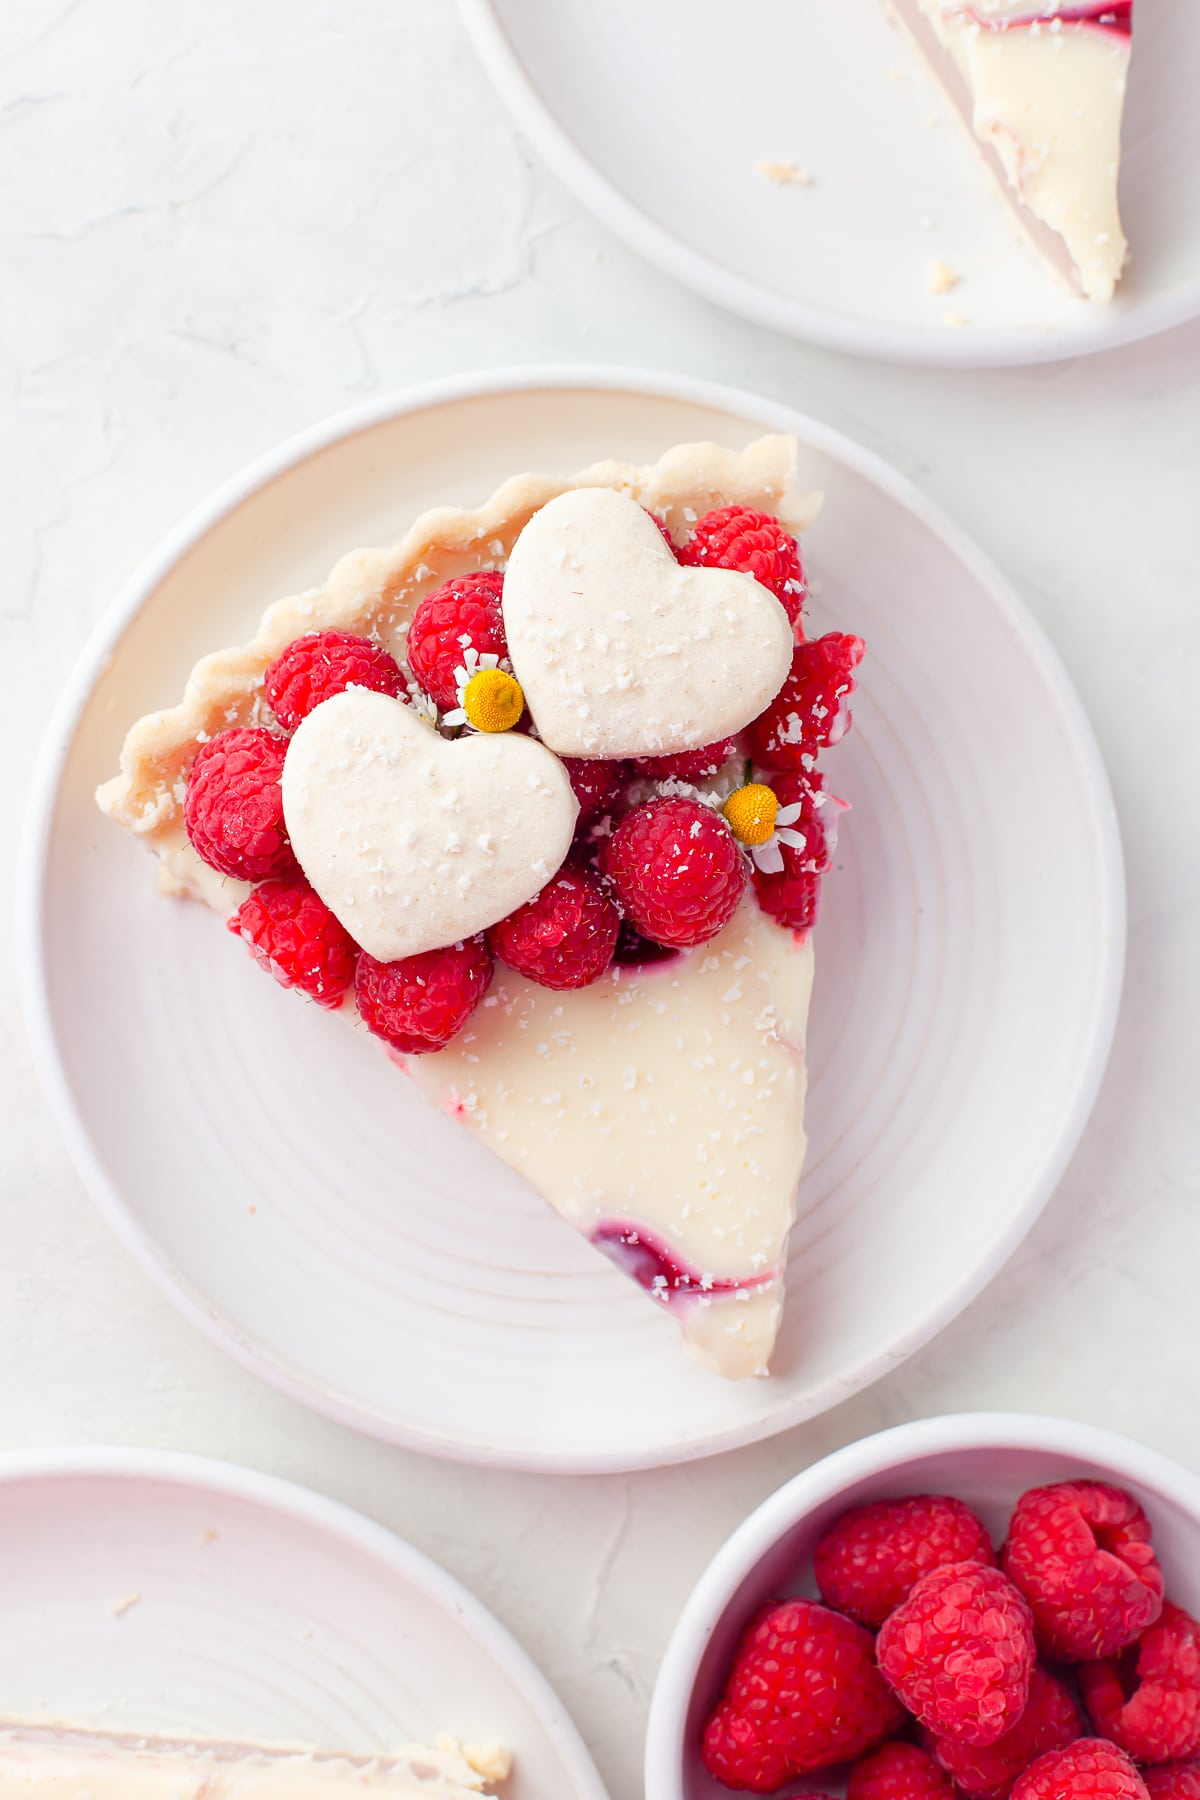 Overhead shot of a slice of Raspberry Tart on a white plate on white countertop with bowl of raspberries